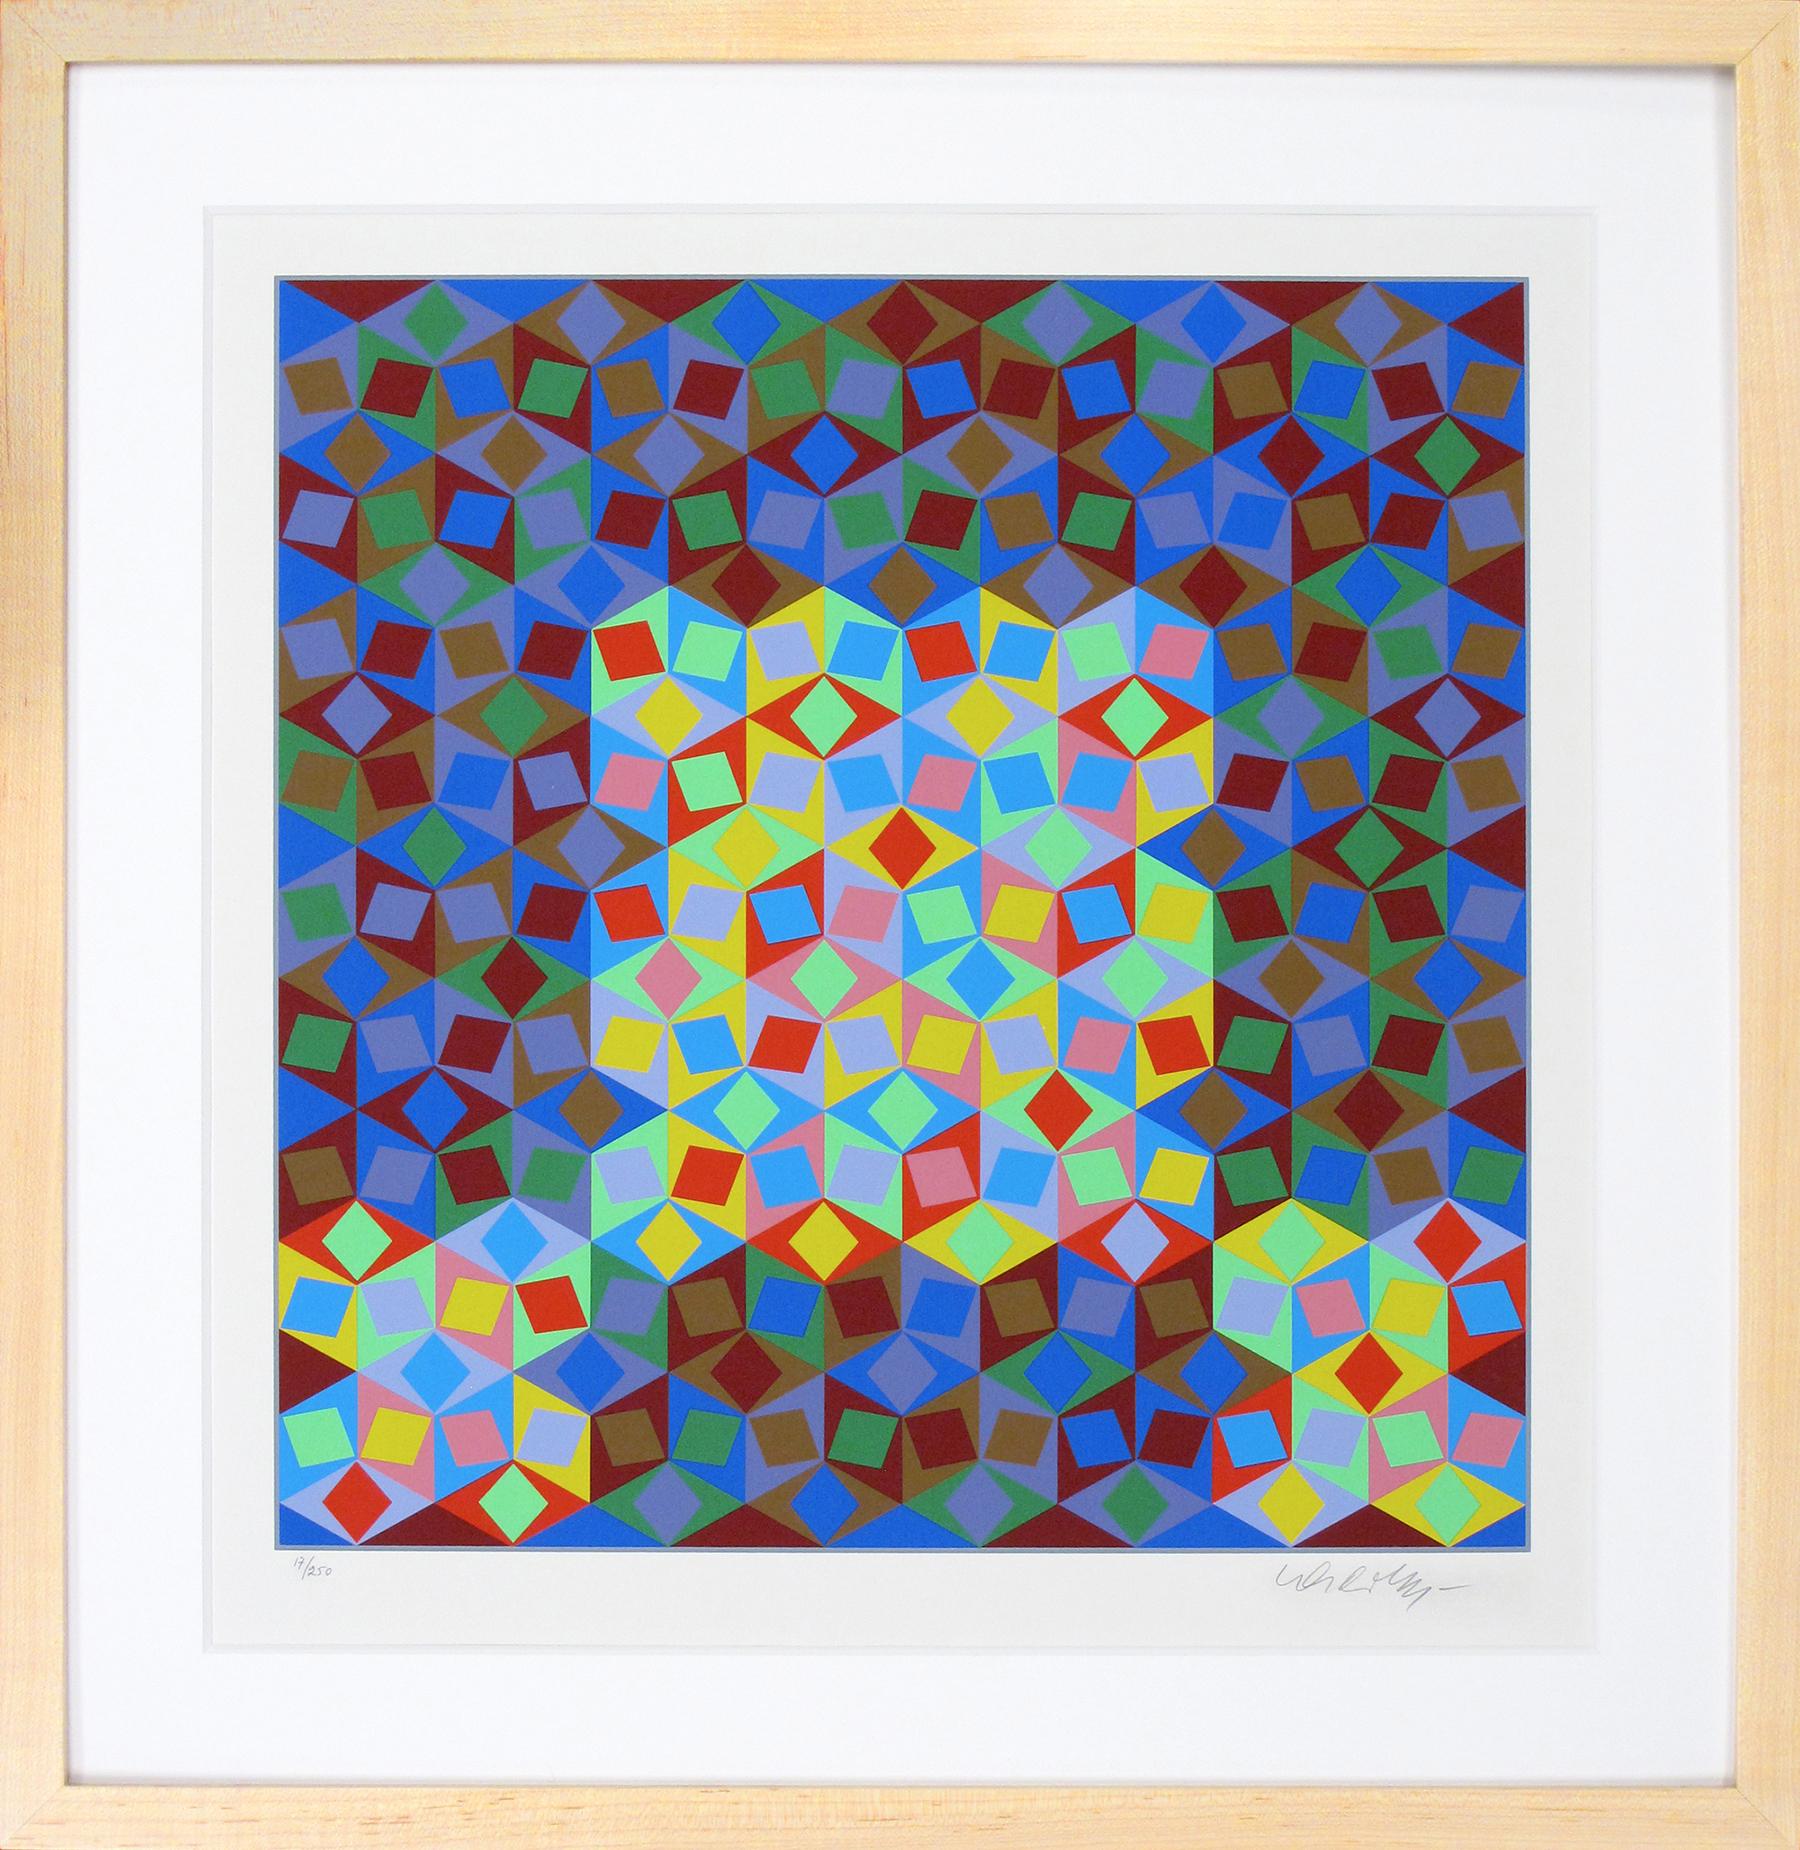 Victor Vasarely's "Photon" is limited edition serigraph in color produced in 1998. This print is numbered 93 of 250 prints on the bottom right corner and signed on the bottom left corner.  This abstract print is composed of a variety of sizes of